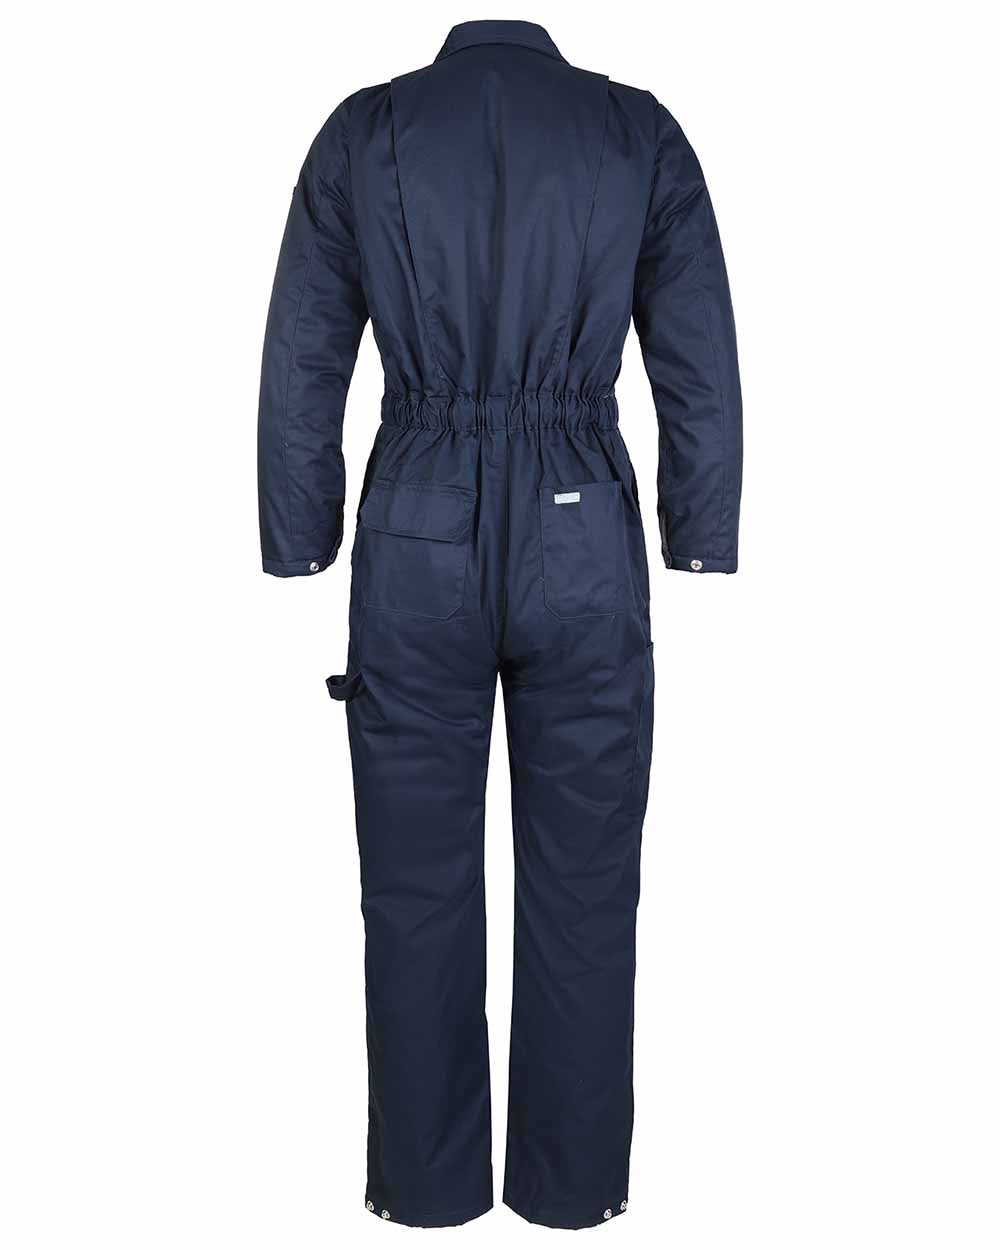 Back view Fort Quilted Padded Boilersuit navy blue 